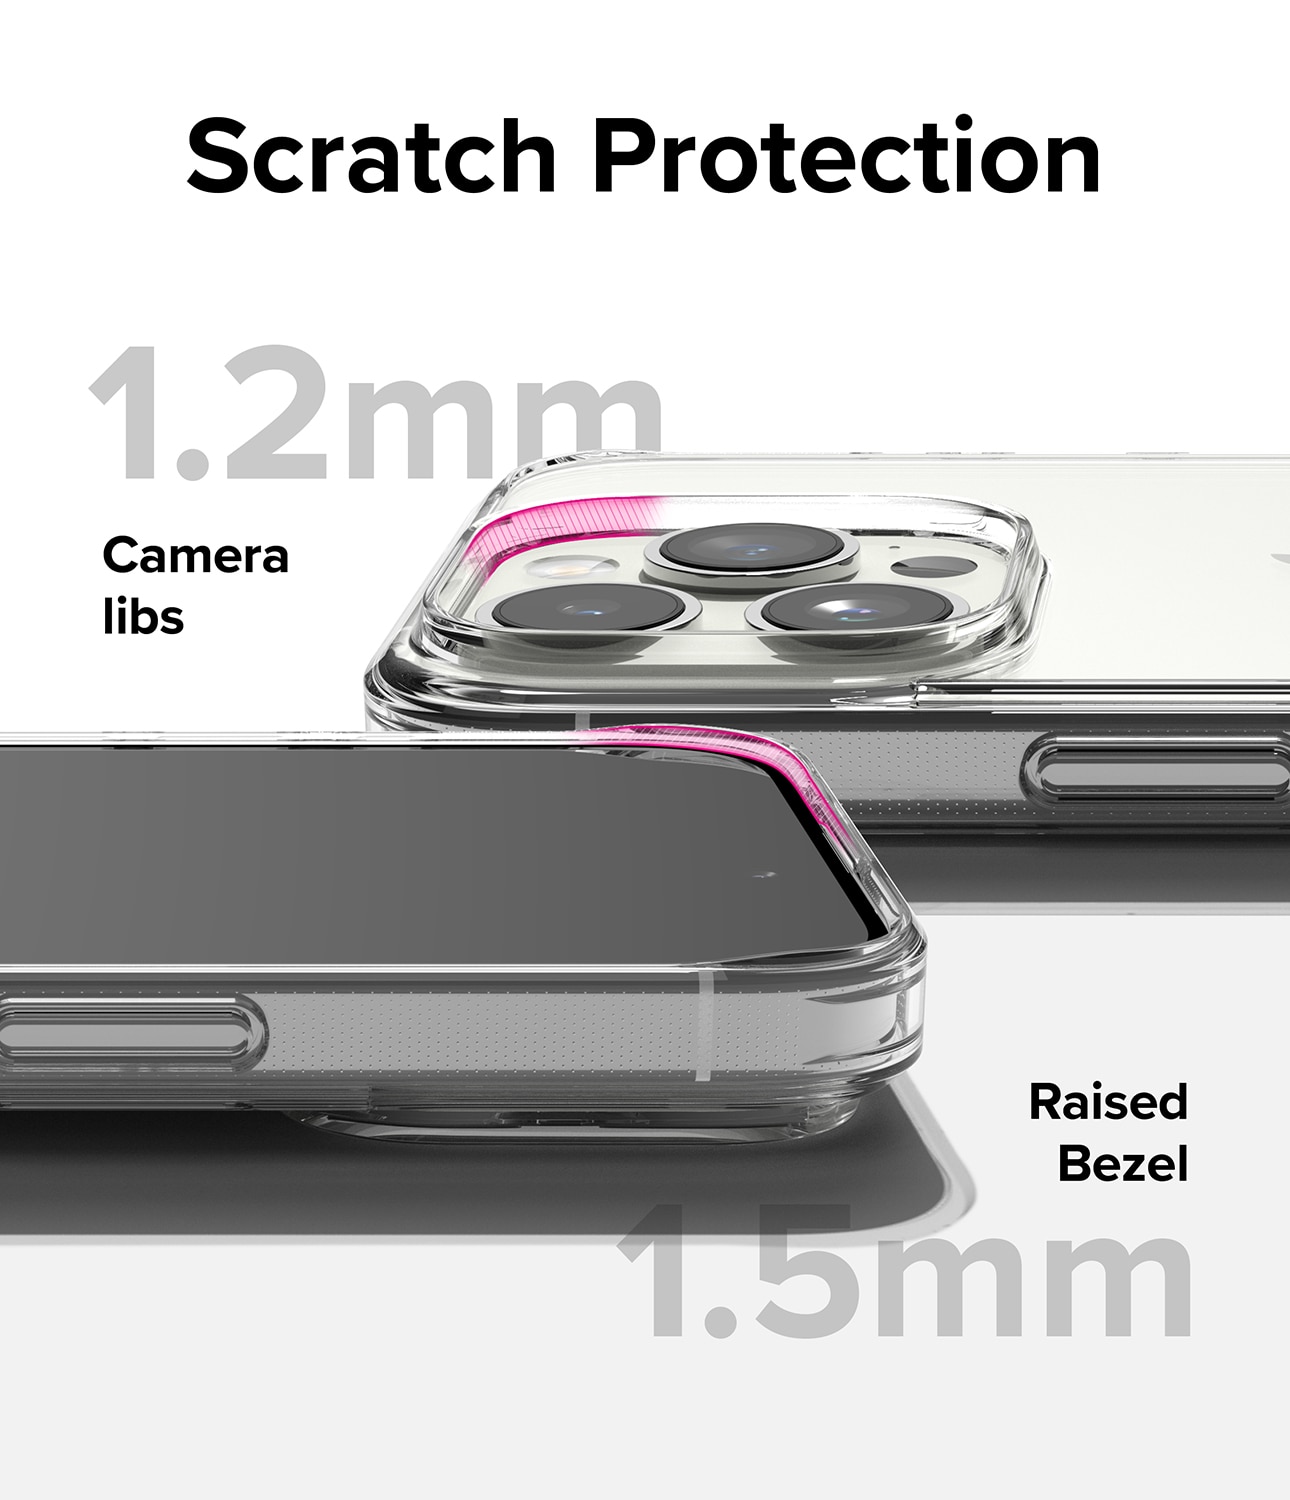 iPhone 15 Pro Fusion Case Clear